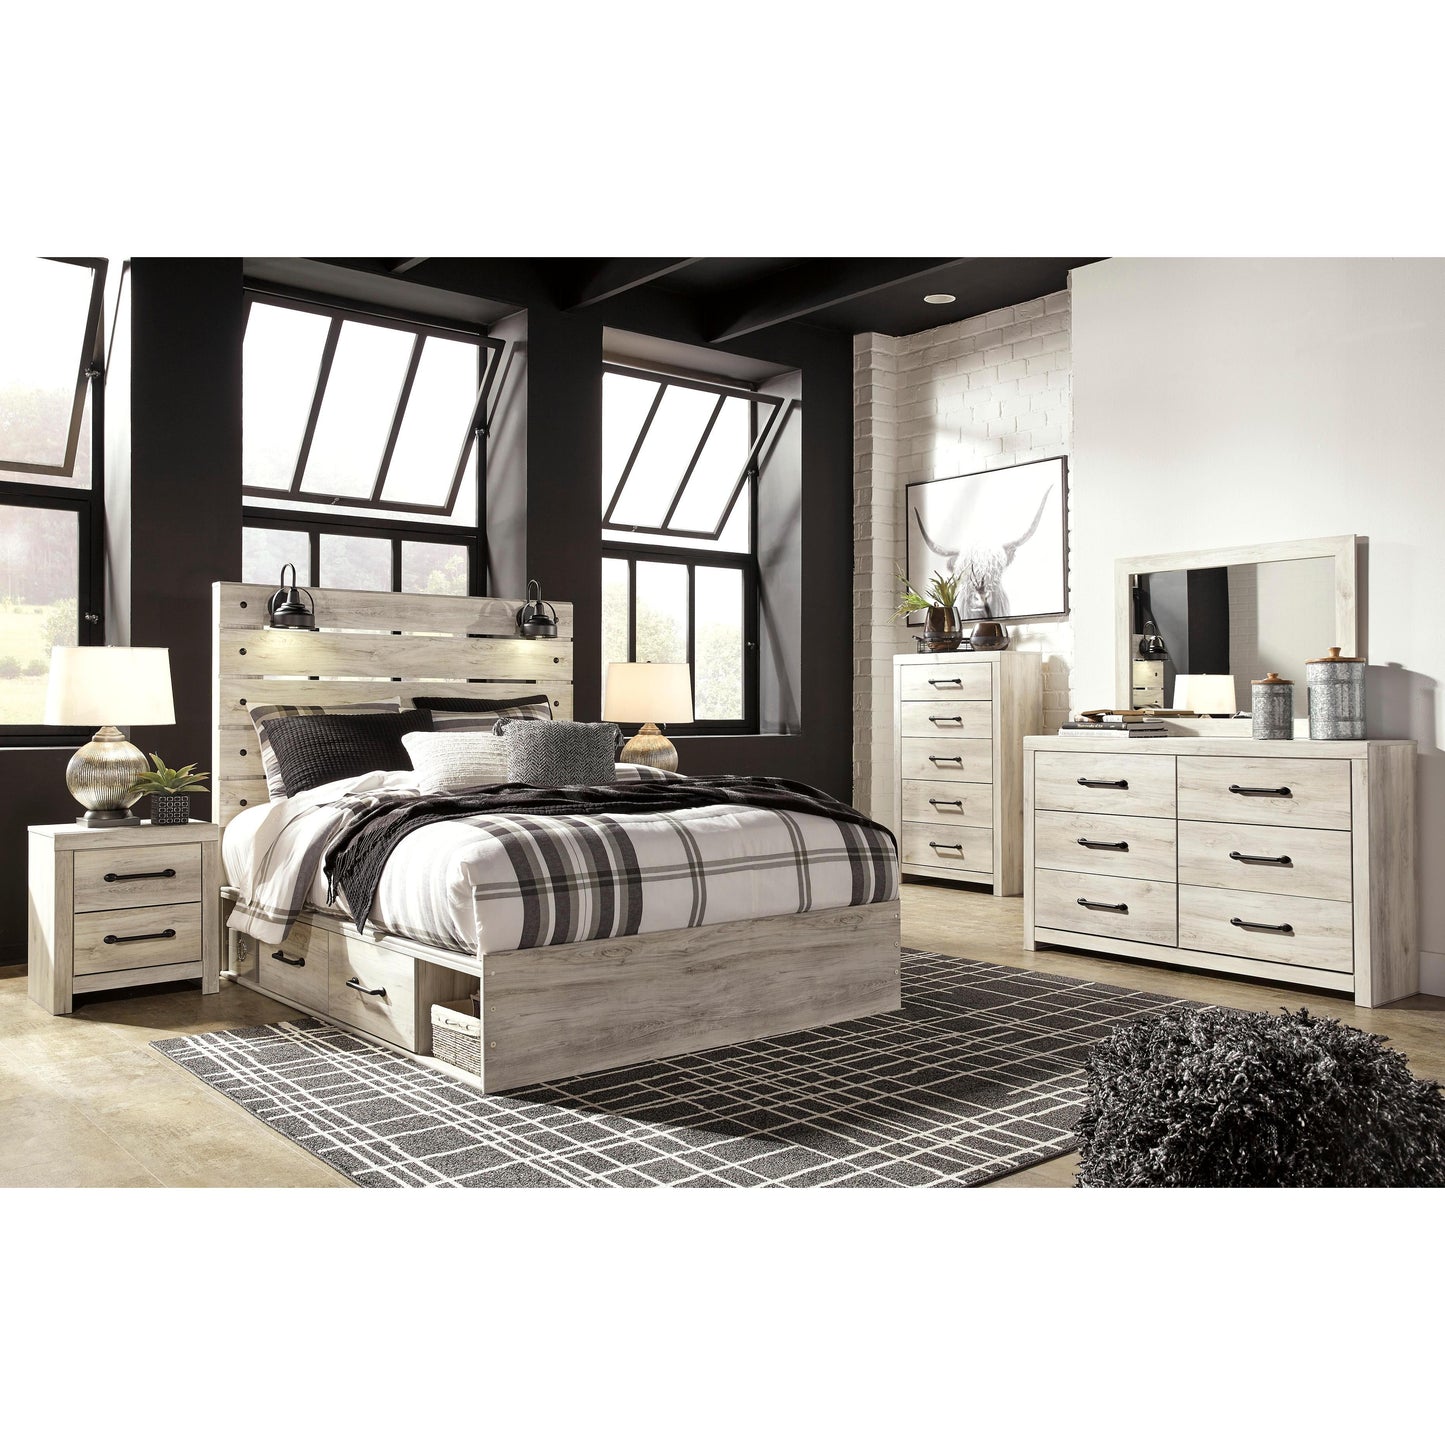 Signature Design by Ashley Cambeck B192B51 6 pc Queen Panel Bedroom Set IMAGE 1